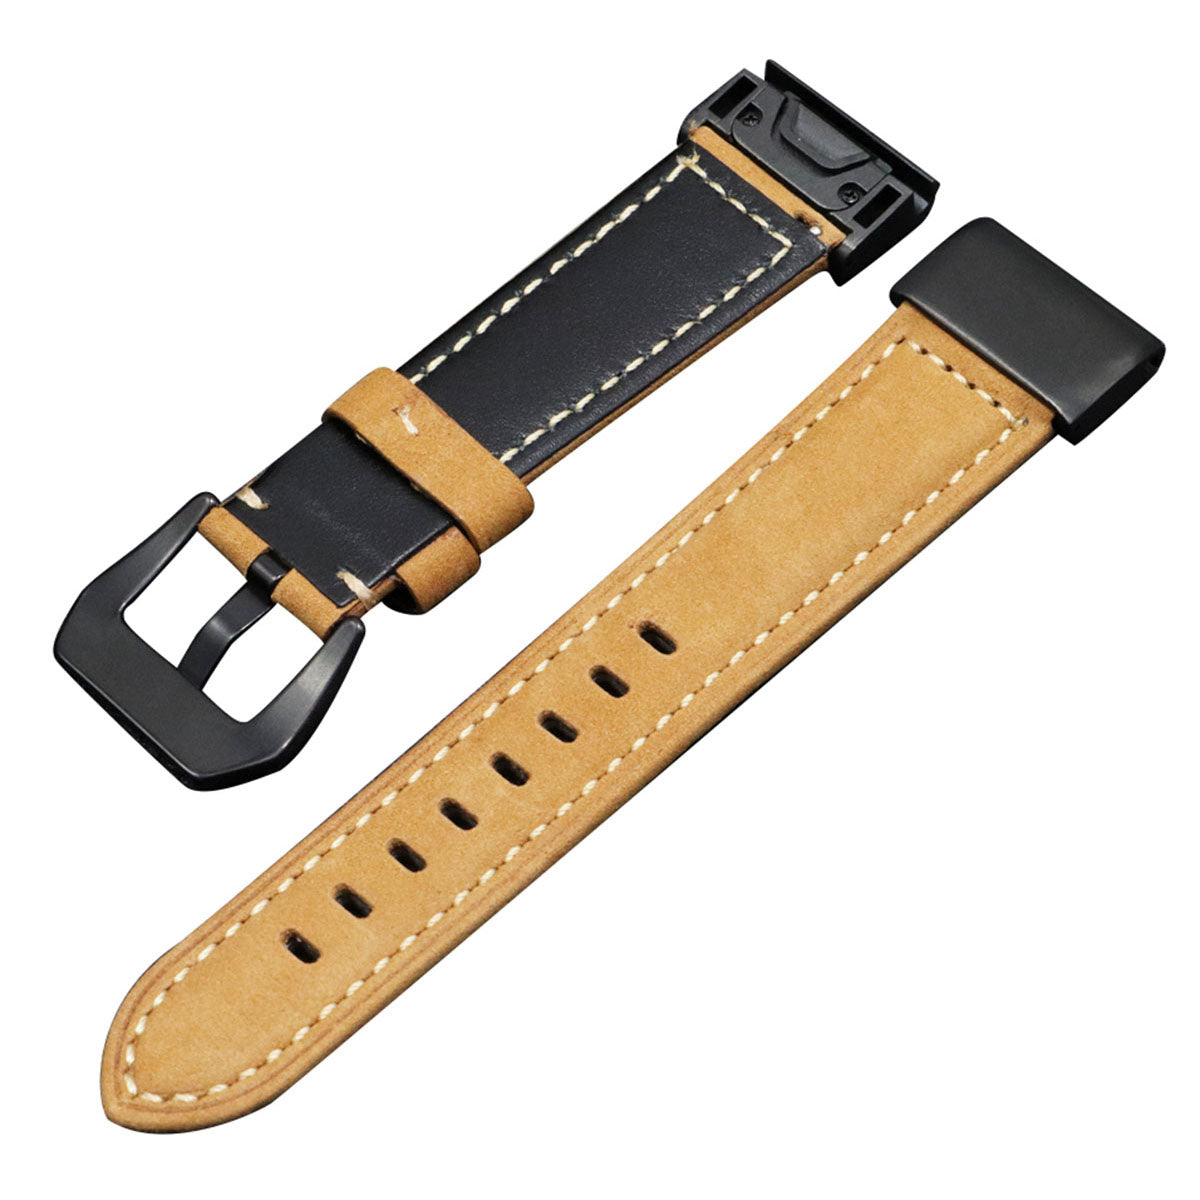 Genuine Leather Watchband Replacement Strap for Garmin MARQ Series/Fenix5/5X/5S/Forerunner945/Approach S60 - Brown